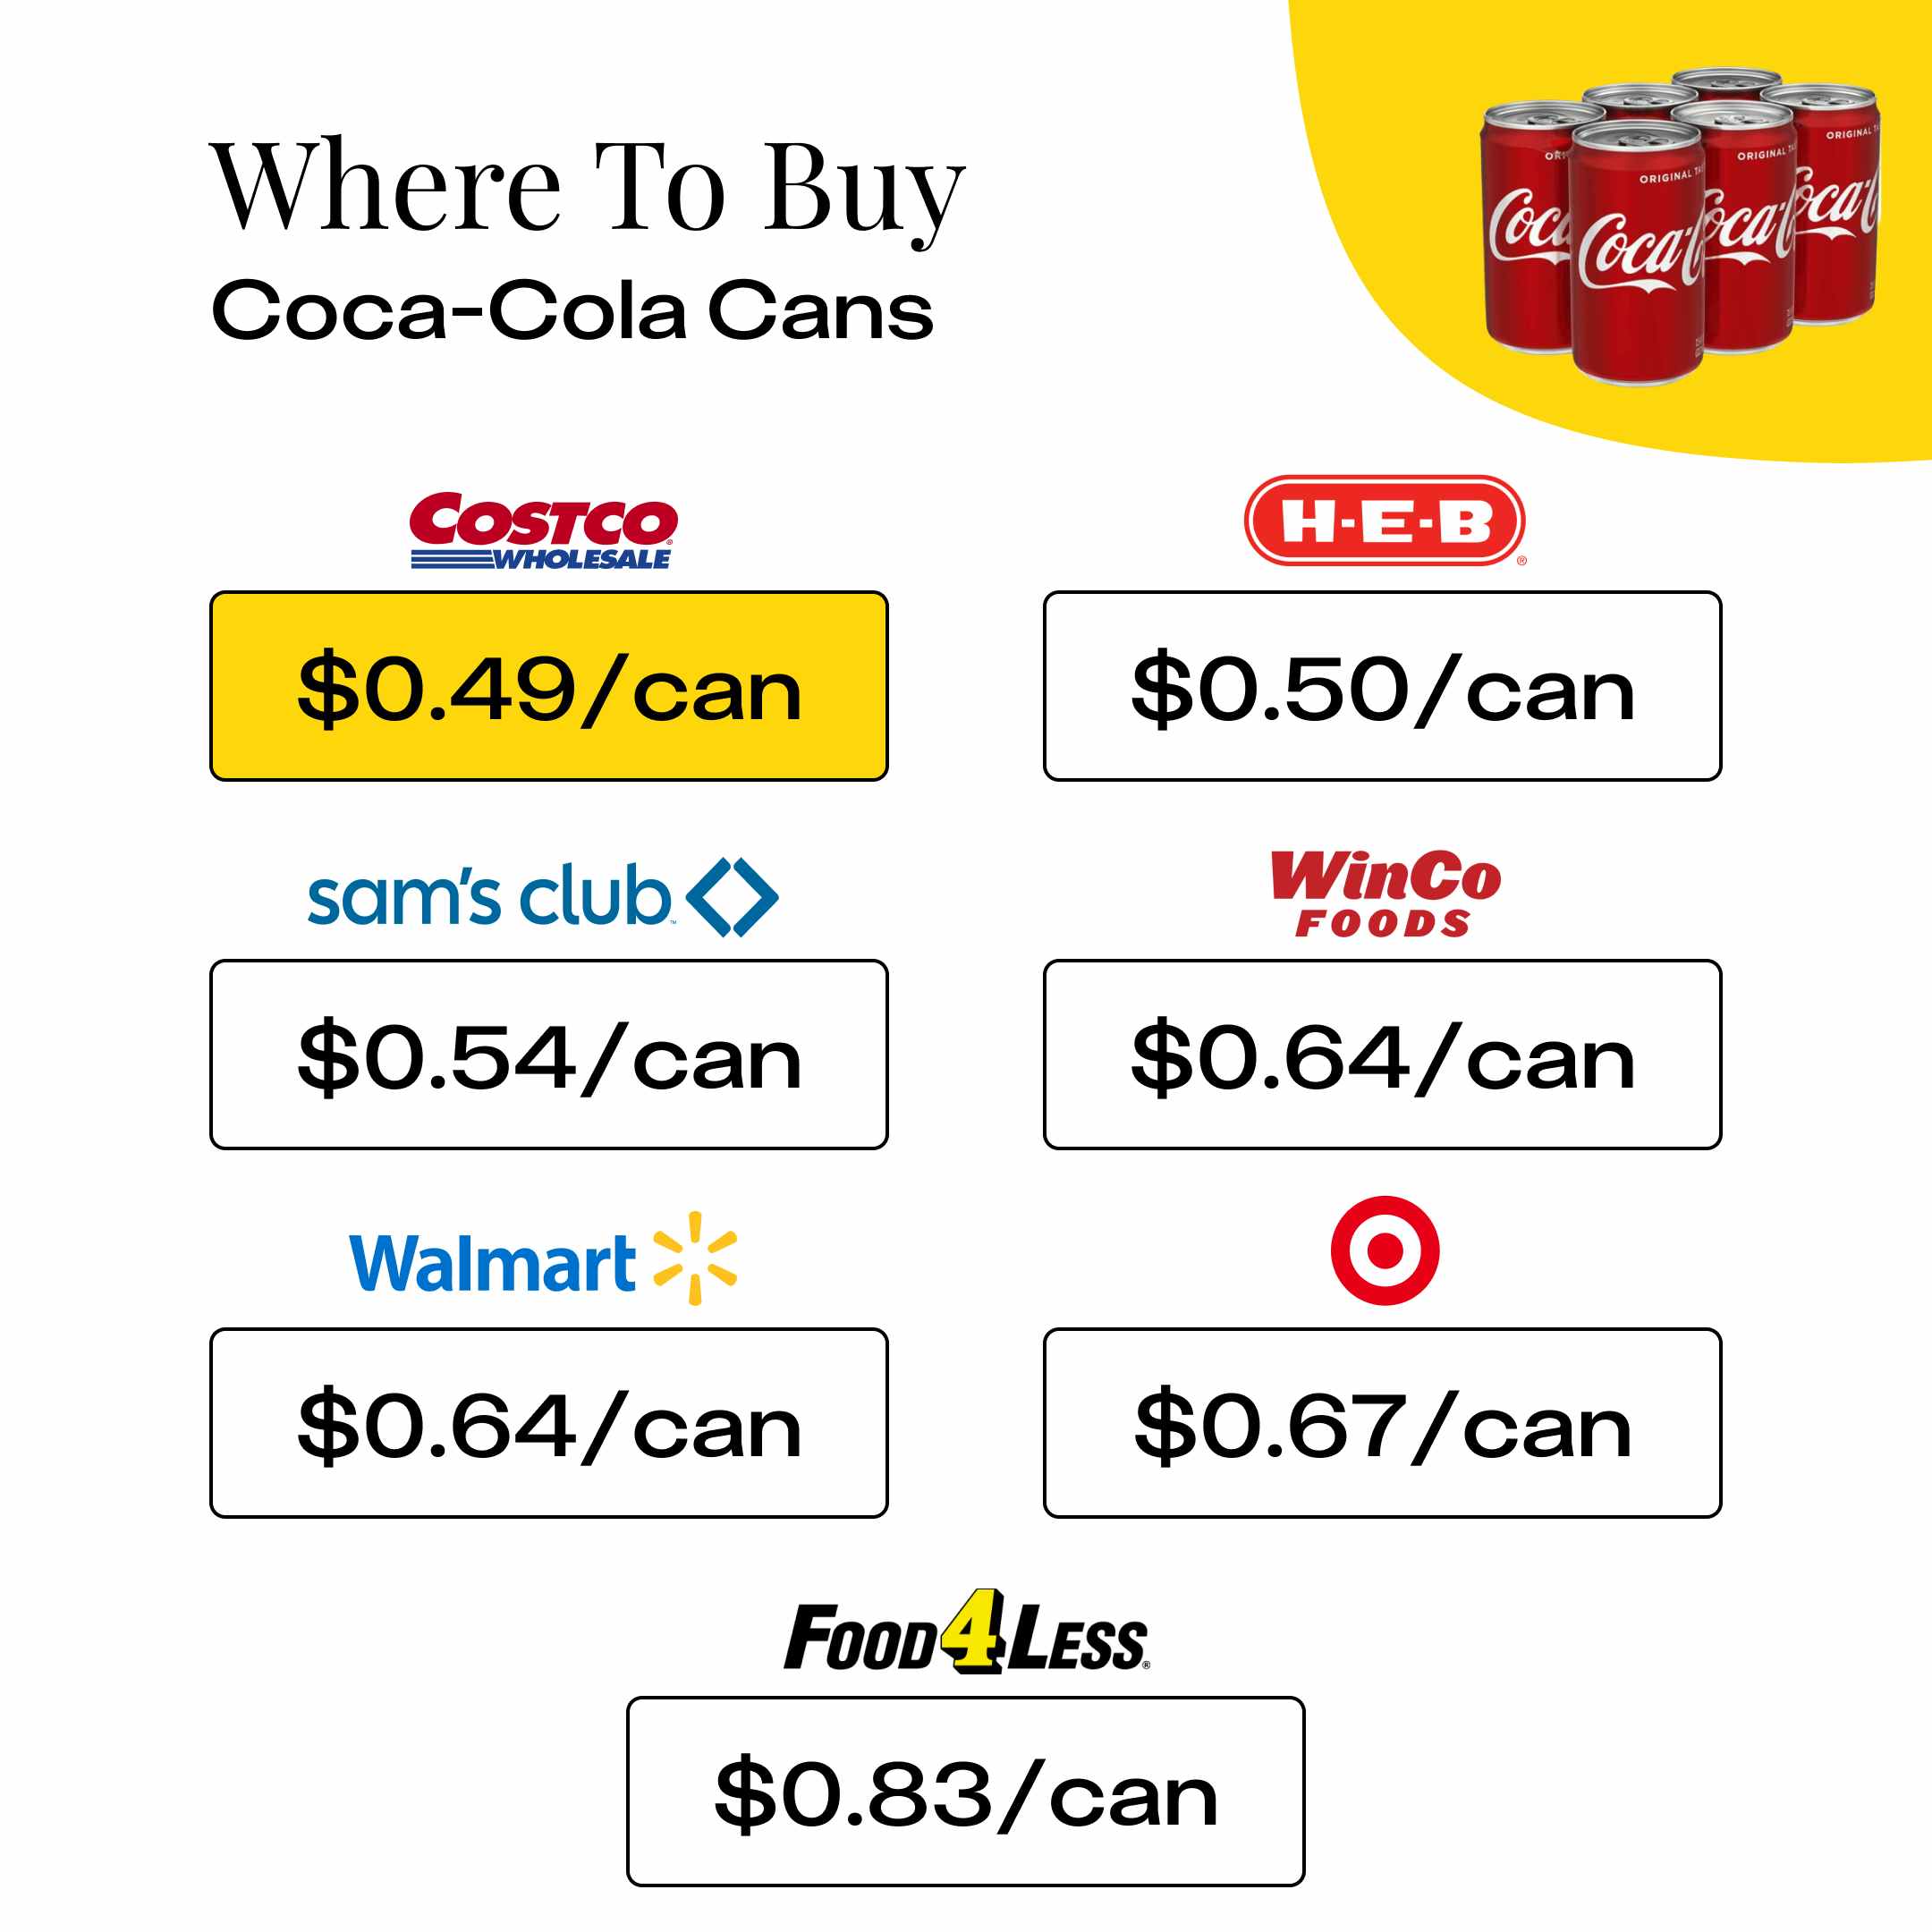 Where To Buy Coca-Cola Cans